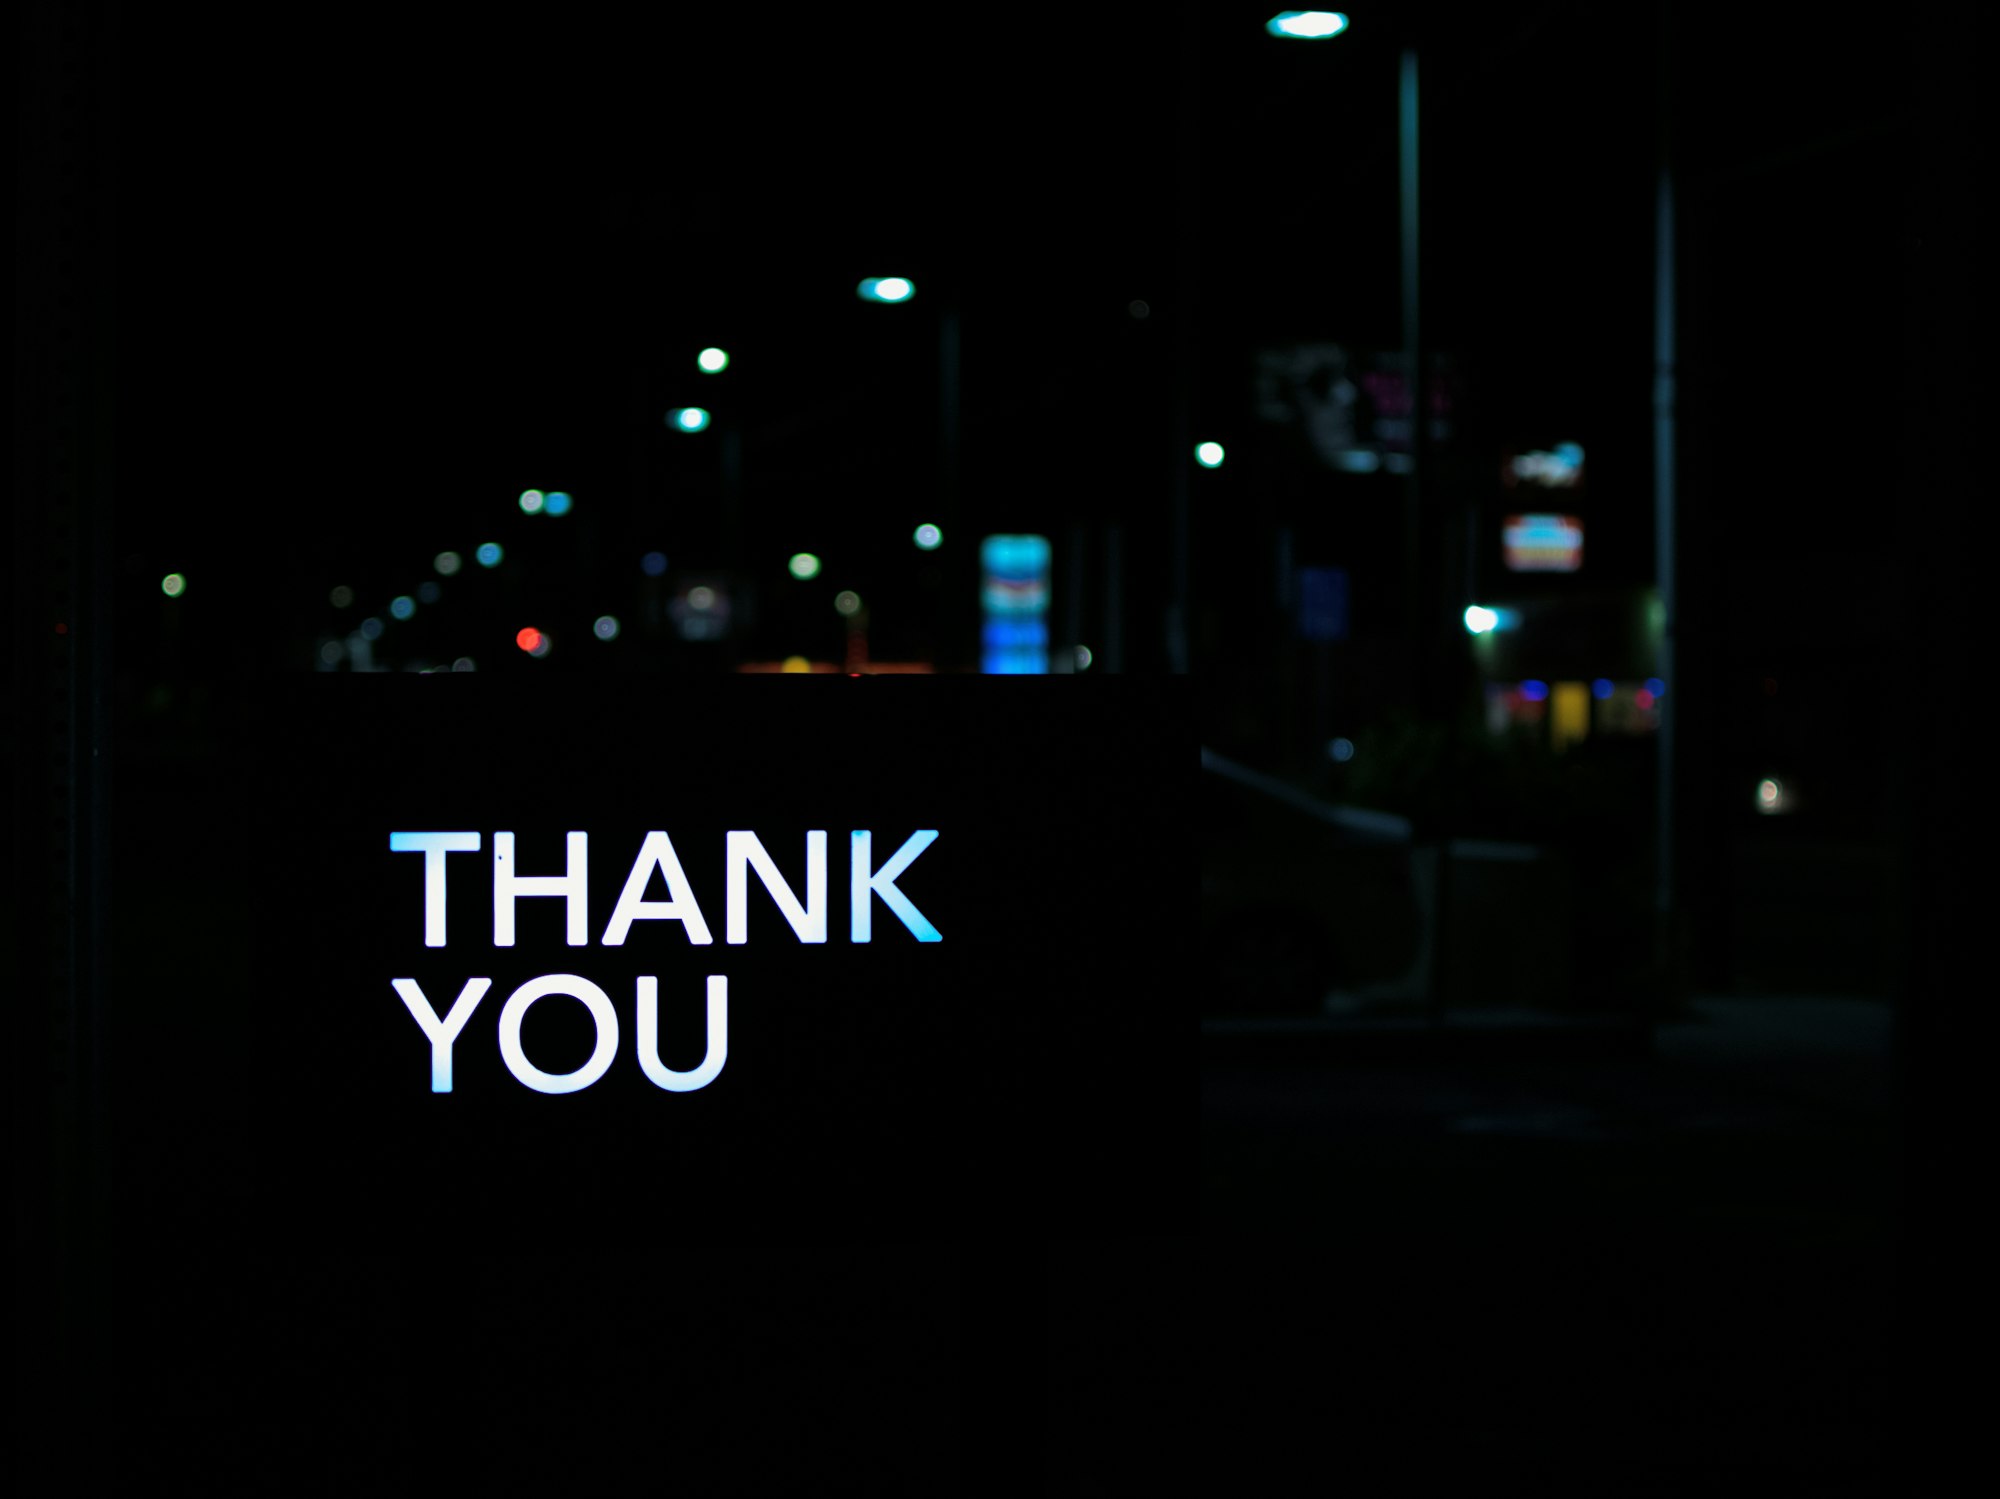 The words "thank you" light up the night on a darkened city street.